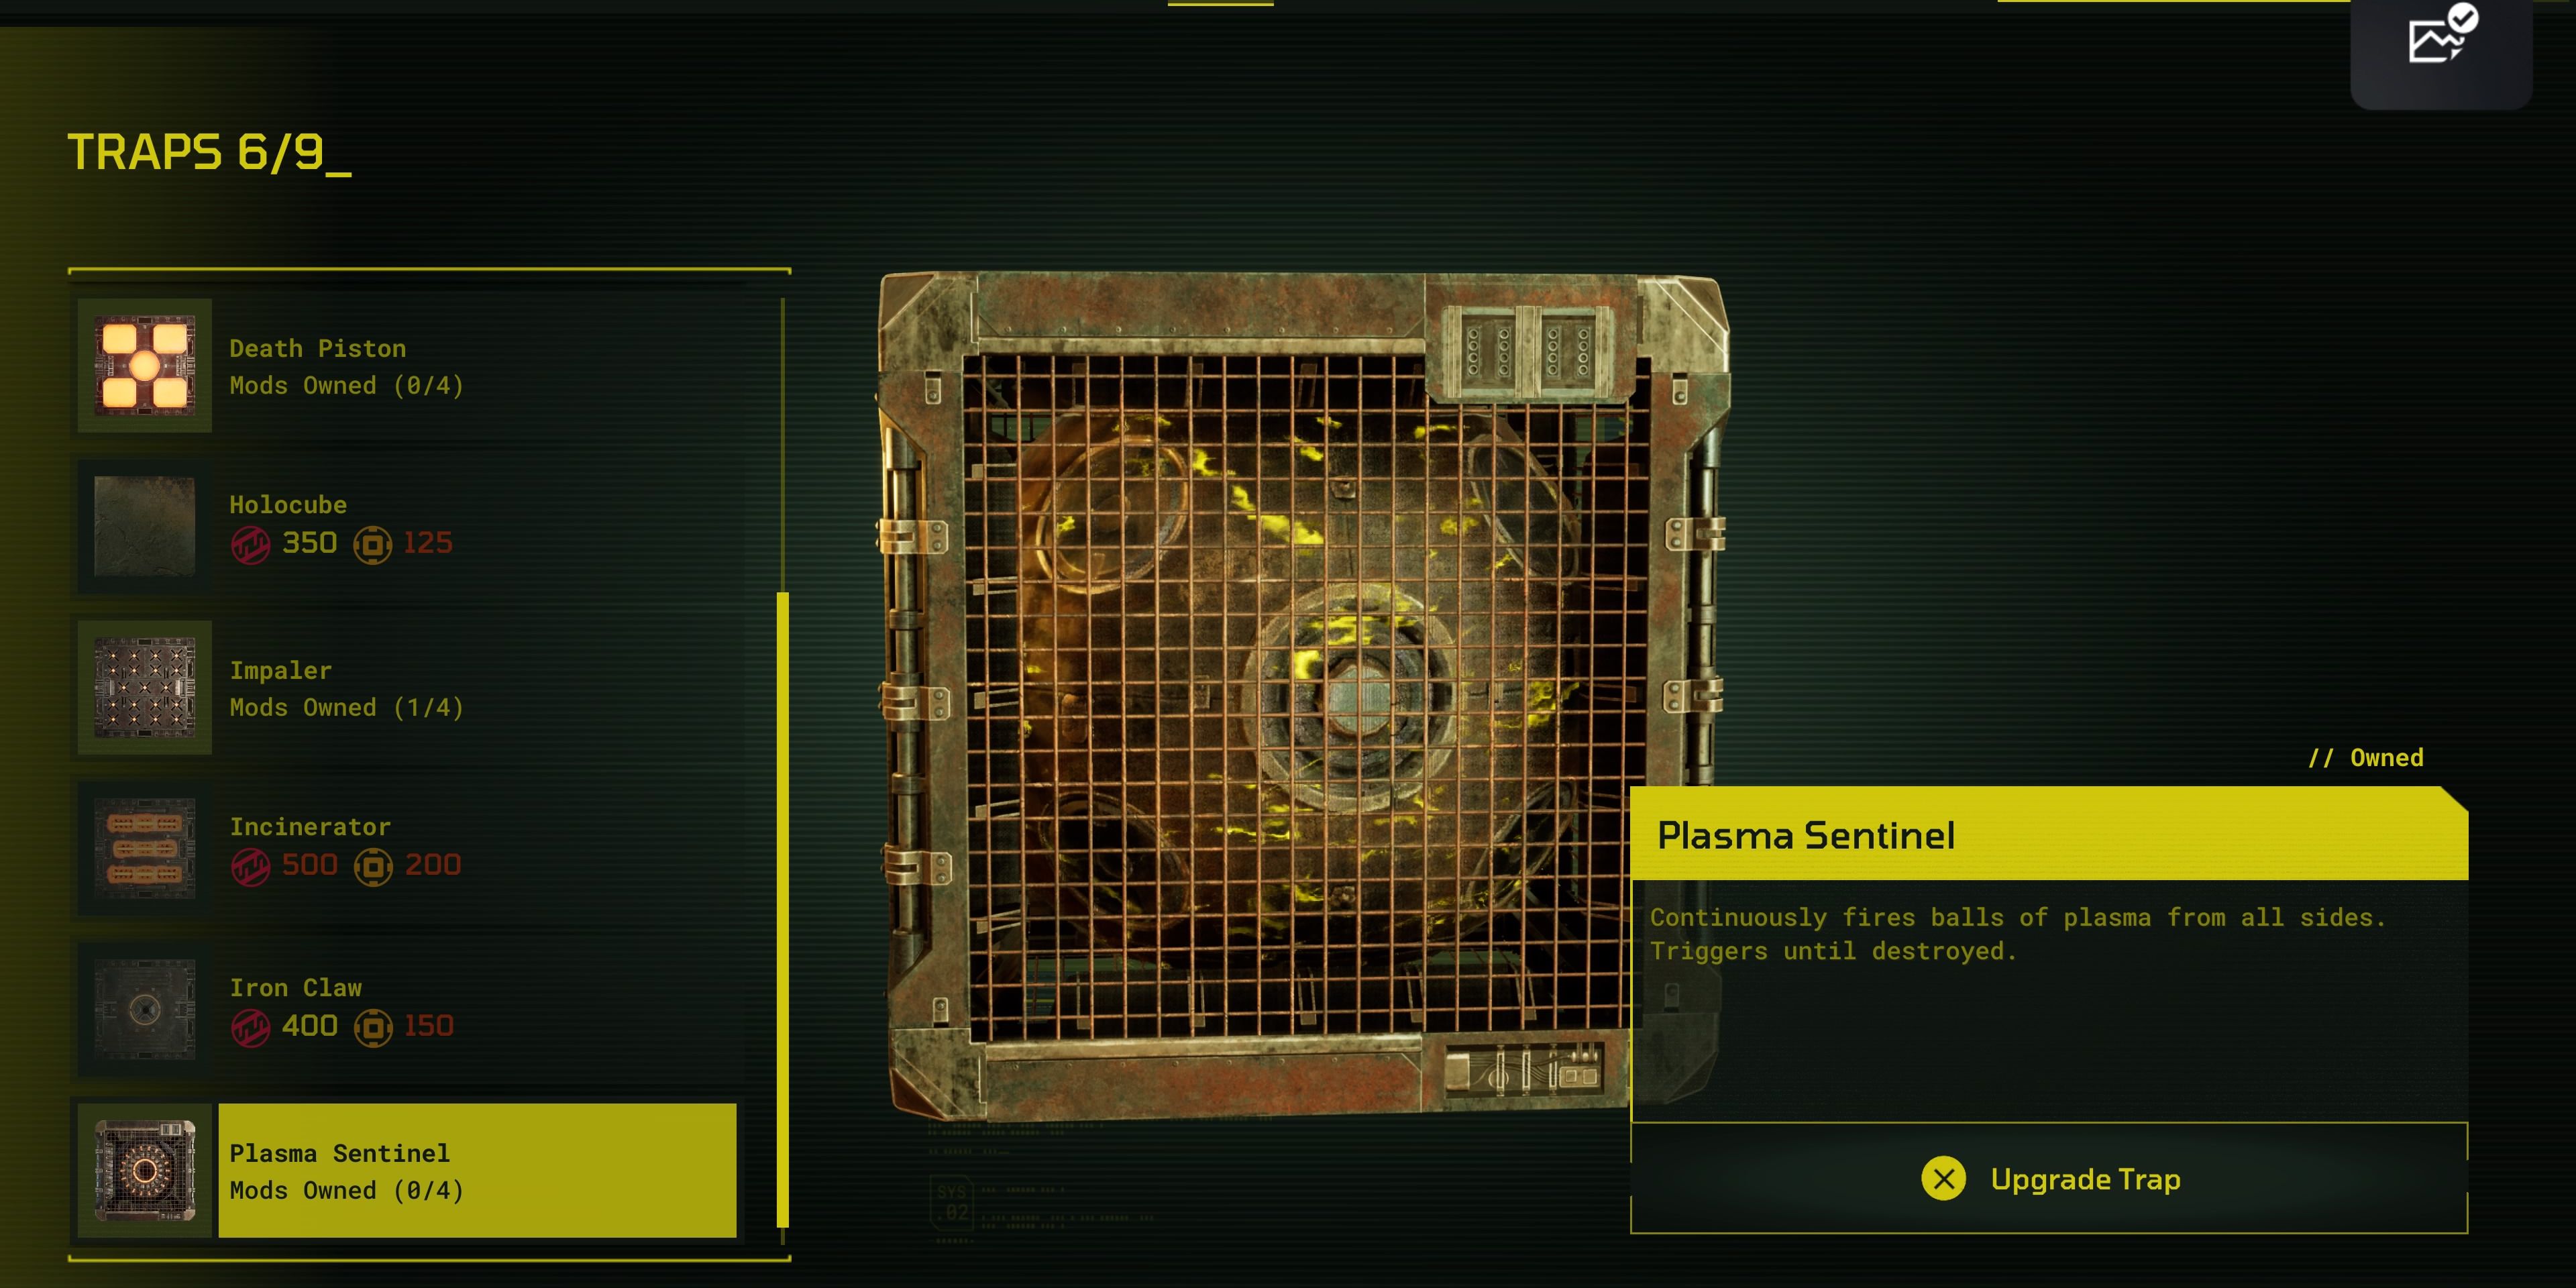 Image shows the Plasma Sentinel trap in Meet Your Maker